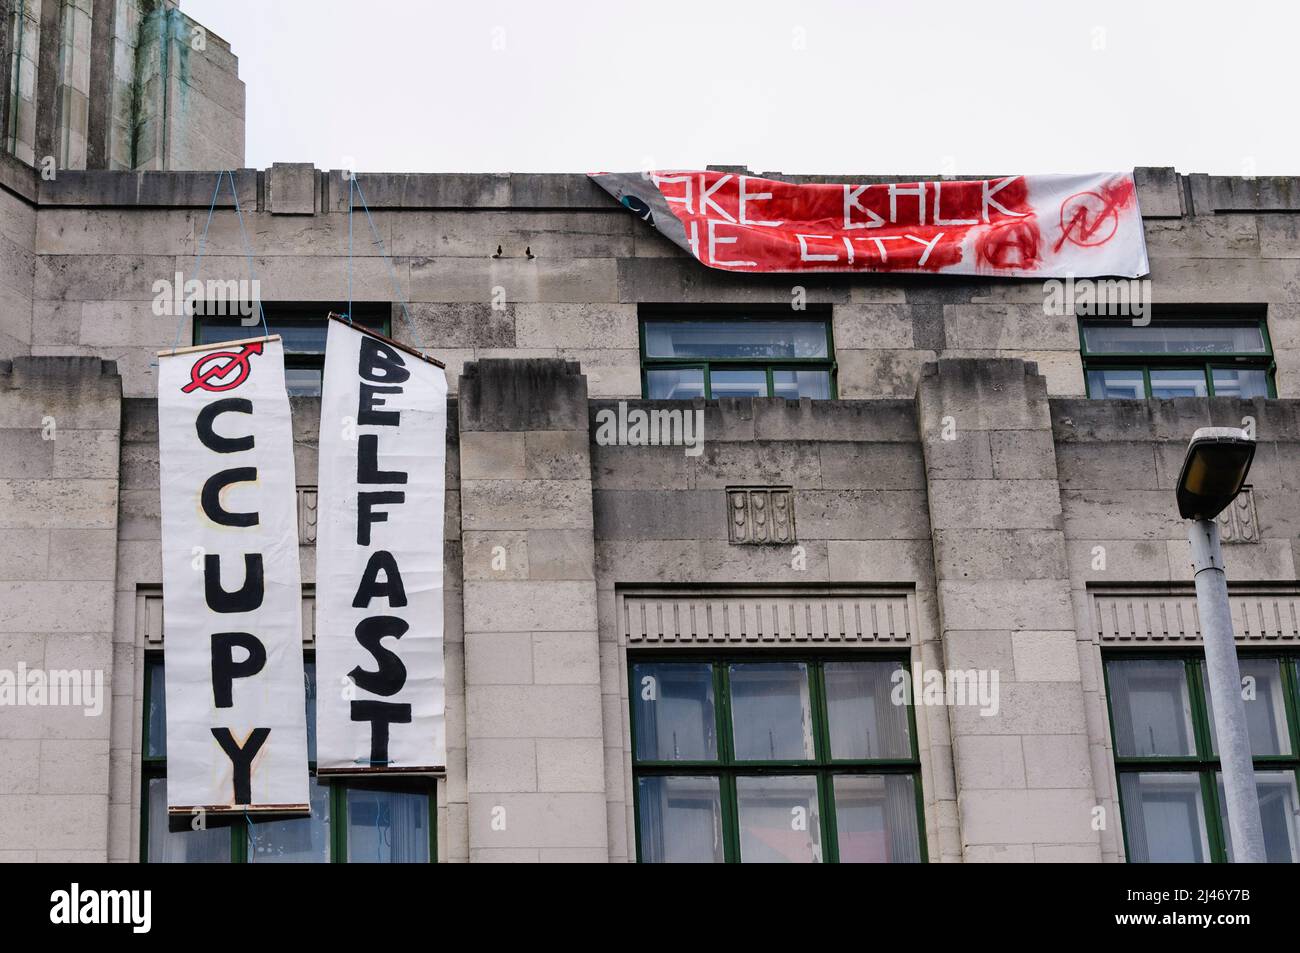 Occupy Belfast take over the old Bank of Ireland Building. BELFAST, 16/01/2012 Stock Photo